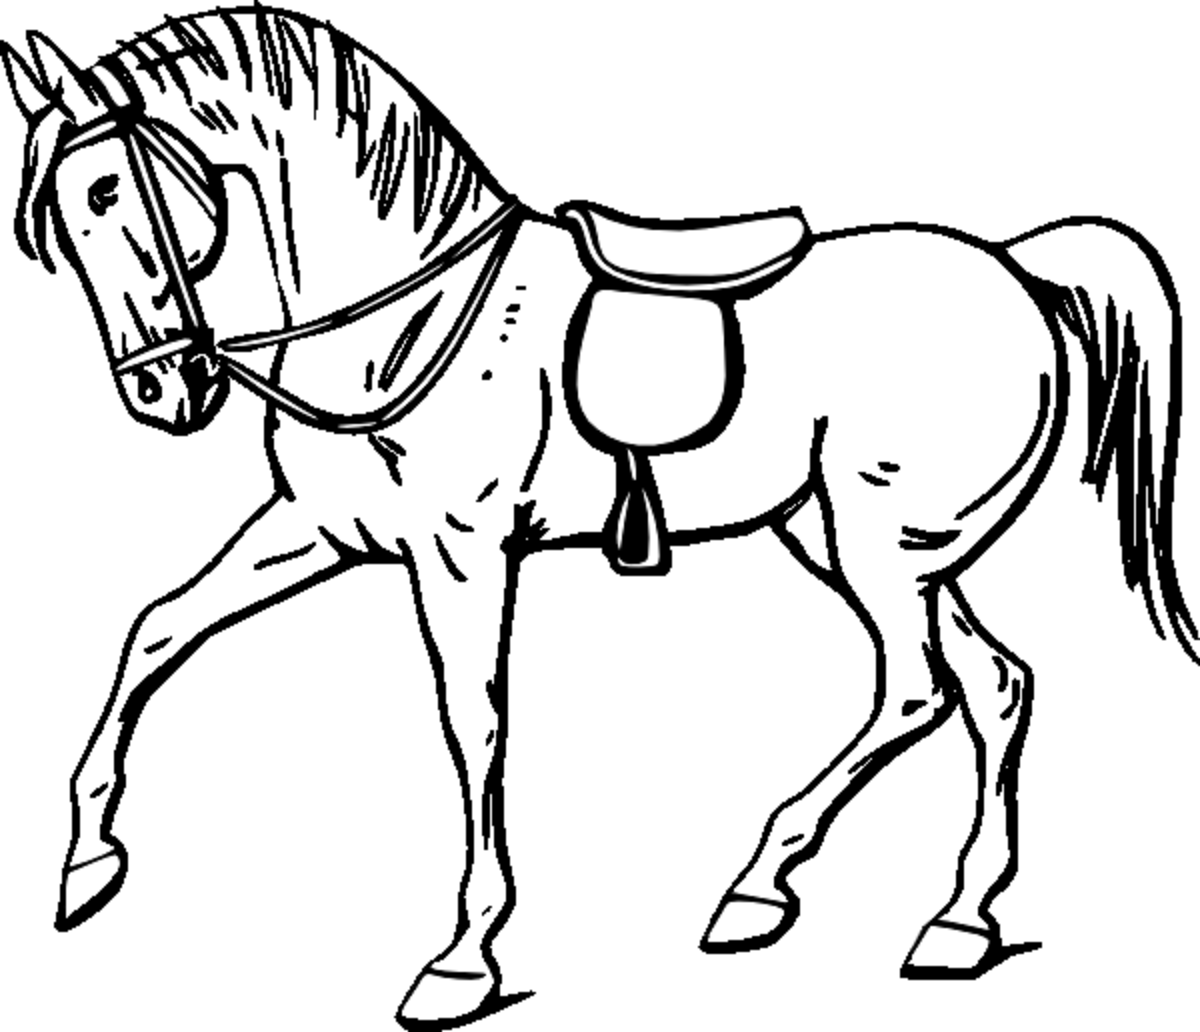 horse pics to color 30 best horse coloring pages ideas we need fun color horse to pics 